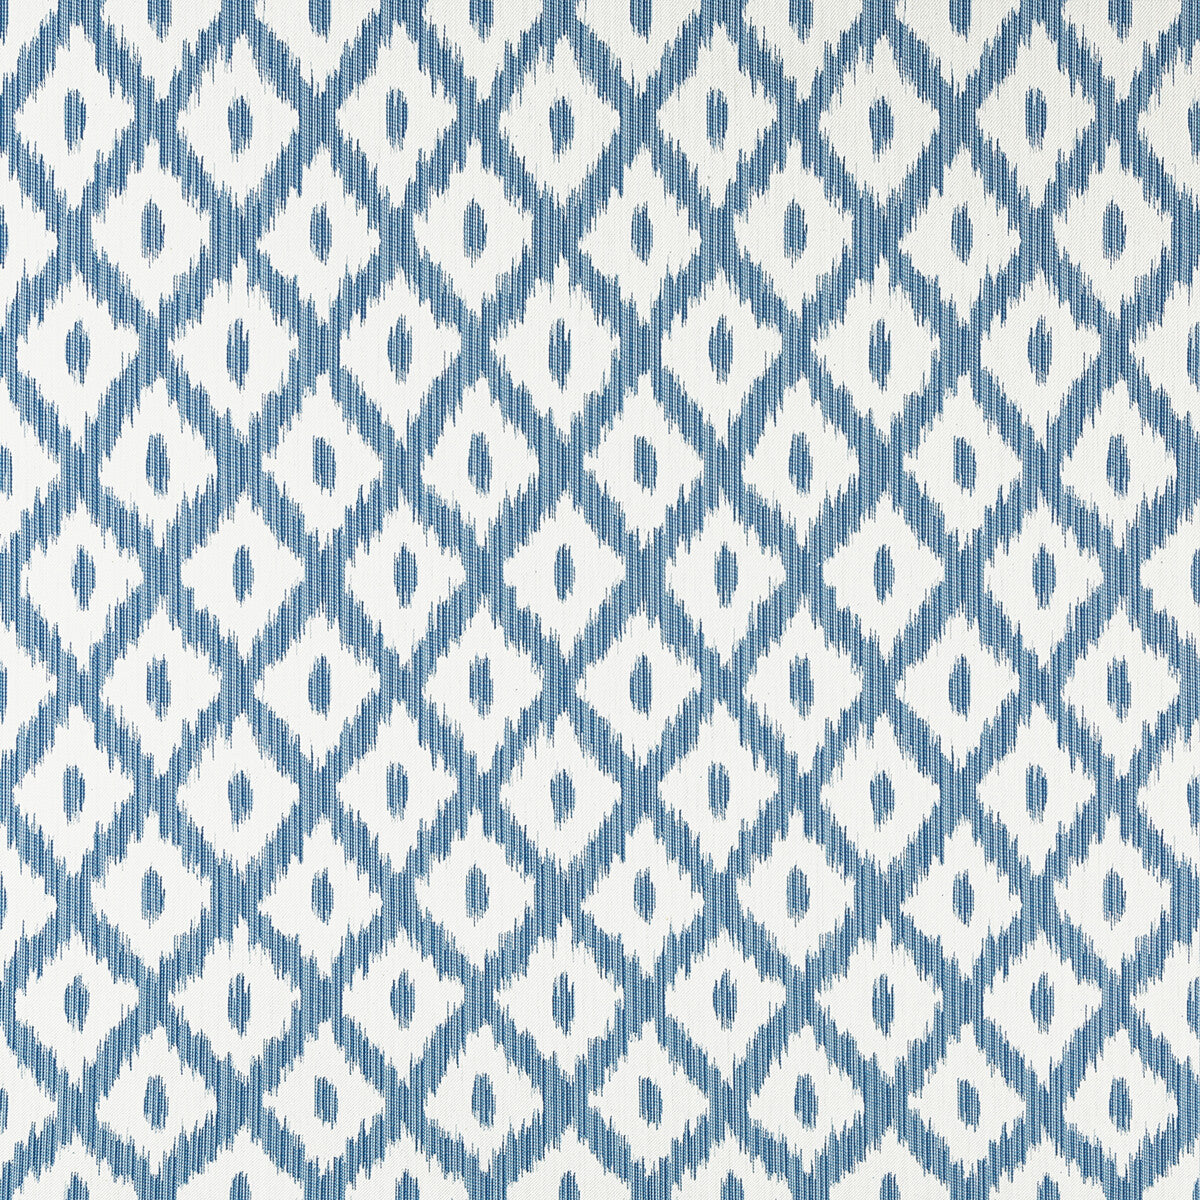 Pitigala fabric in chambray color - pattern 35762.15.0 - by Kravet Basics in the Ceylon collection